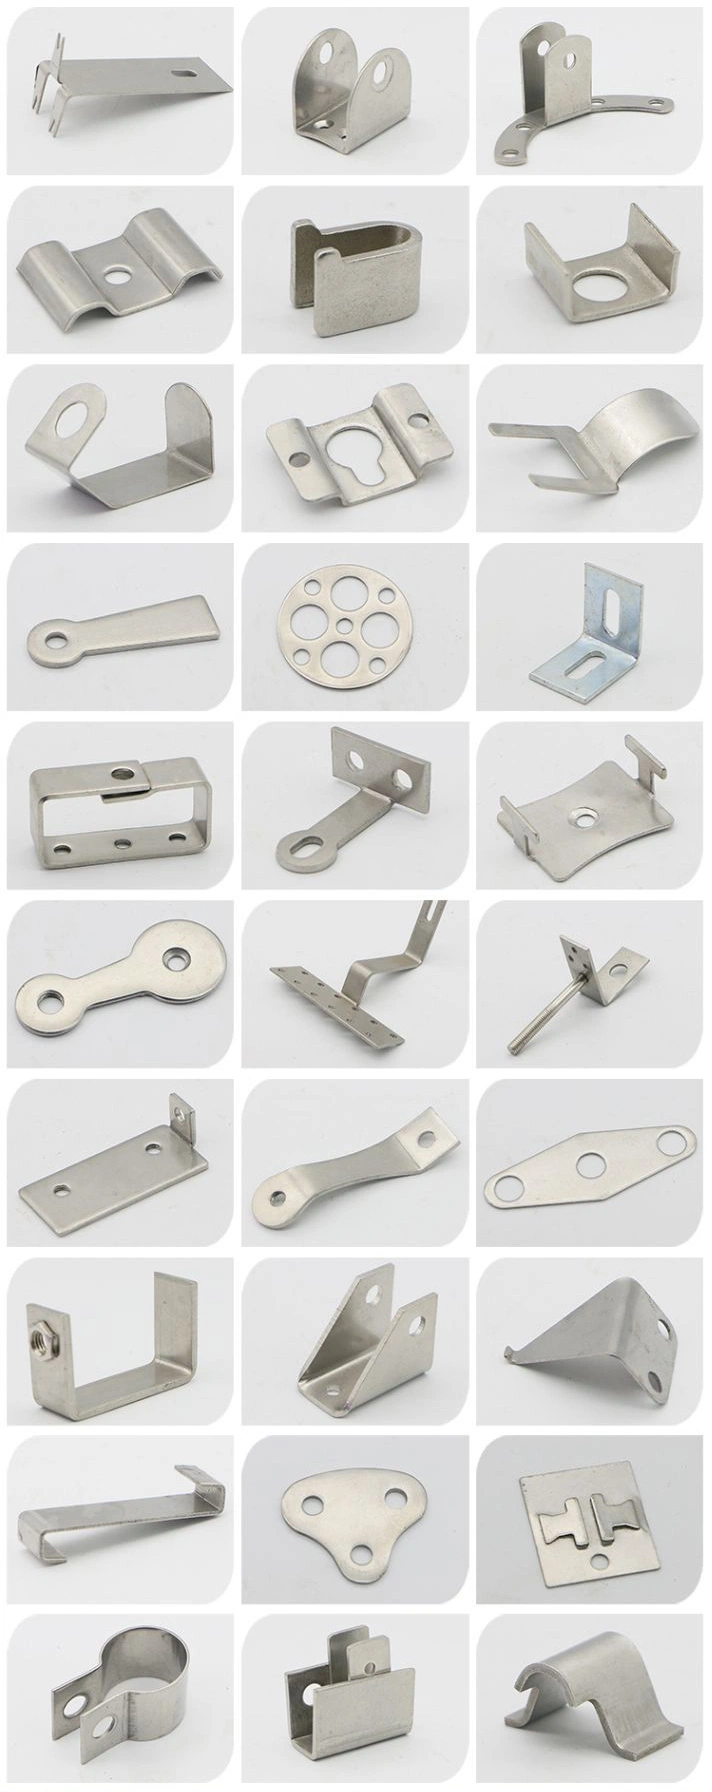 High Precision Stainless Steel Metal Parts Machining Custom CNC Machined Components Fast and Cost-Effective Manufacturing